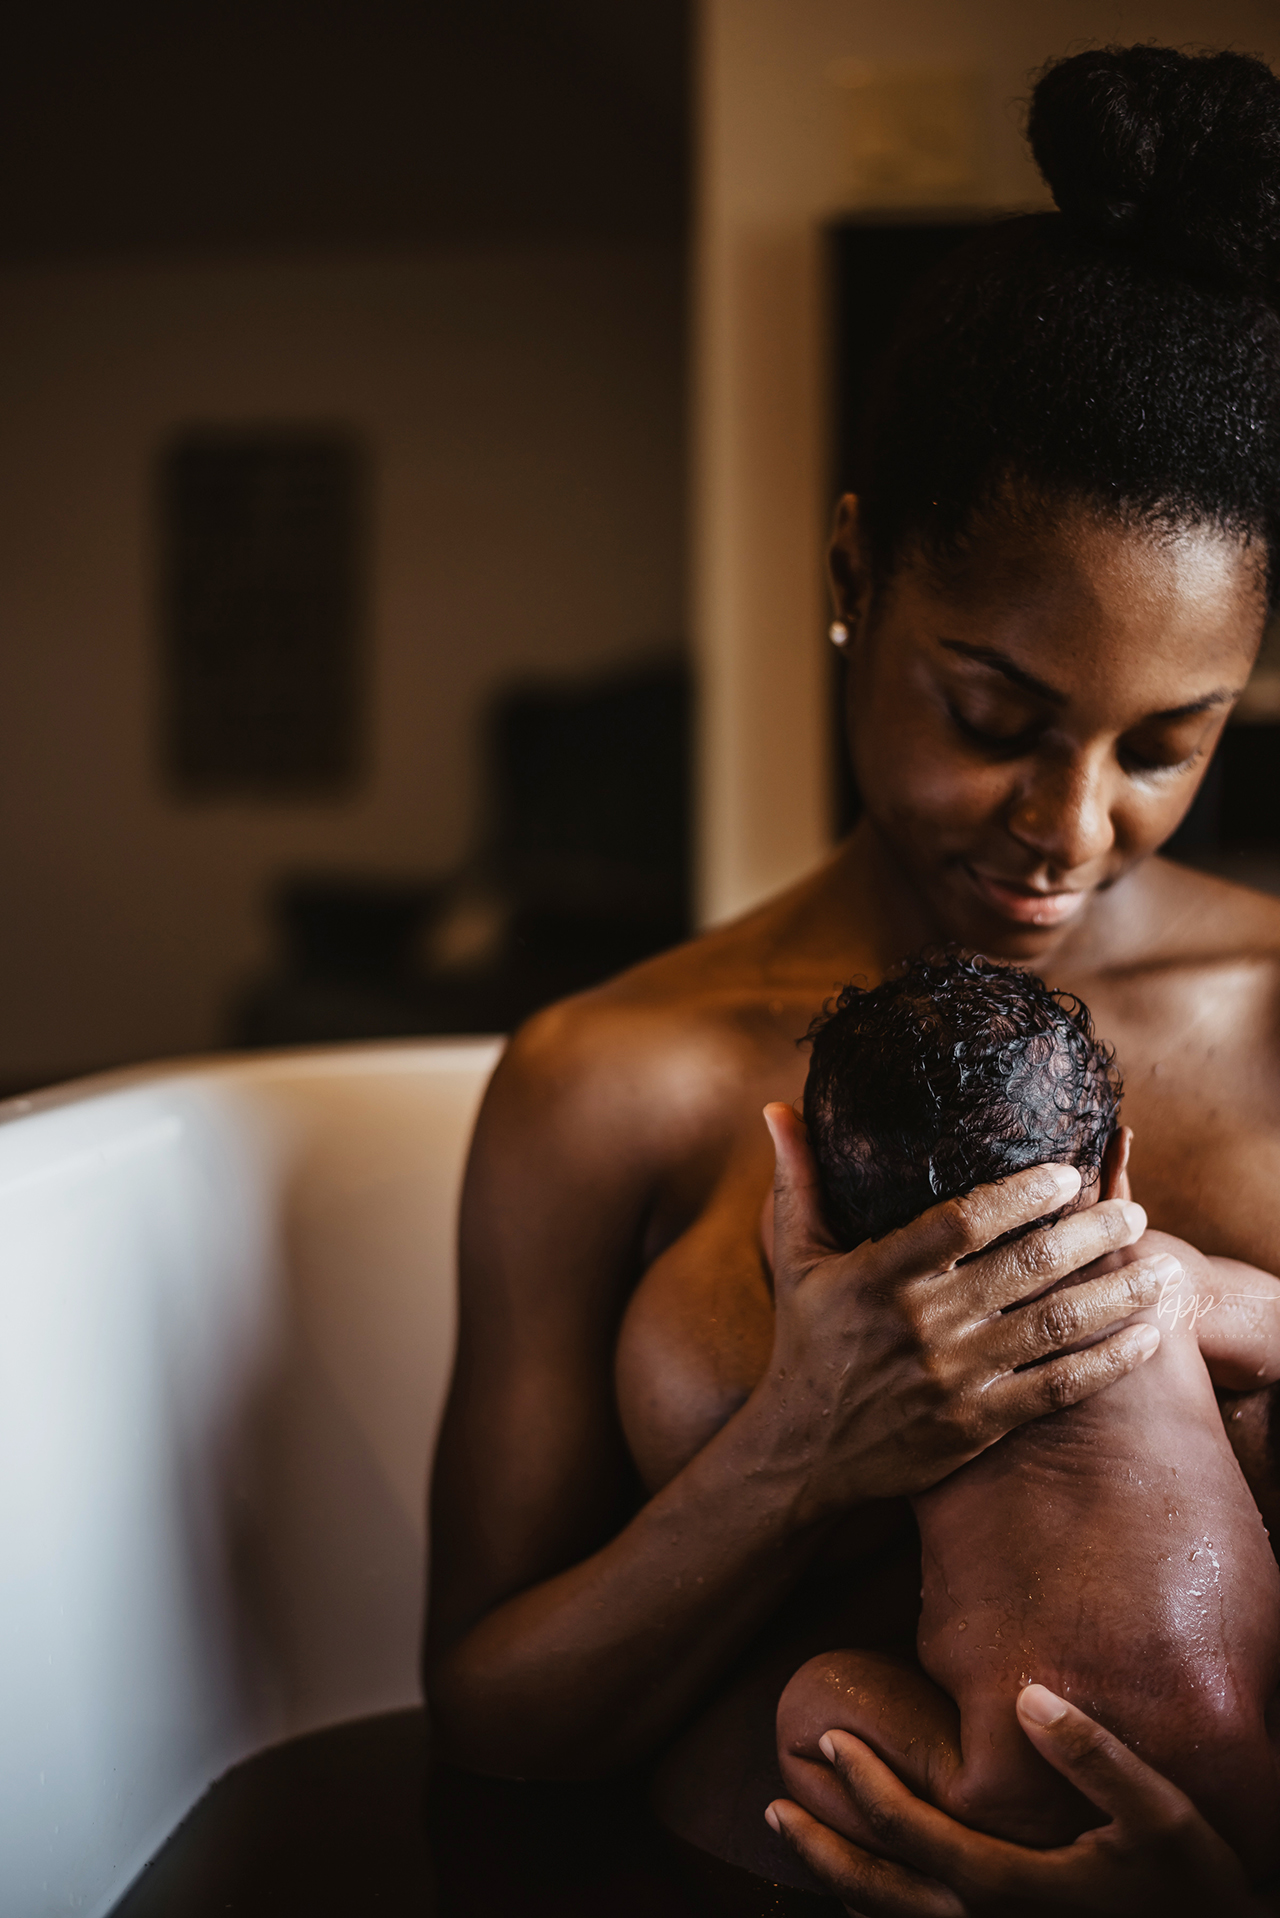 A woman bathes with her newborn baby from the life after birth coffee table book about the postpartum experience